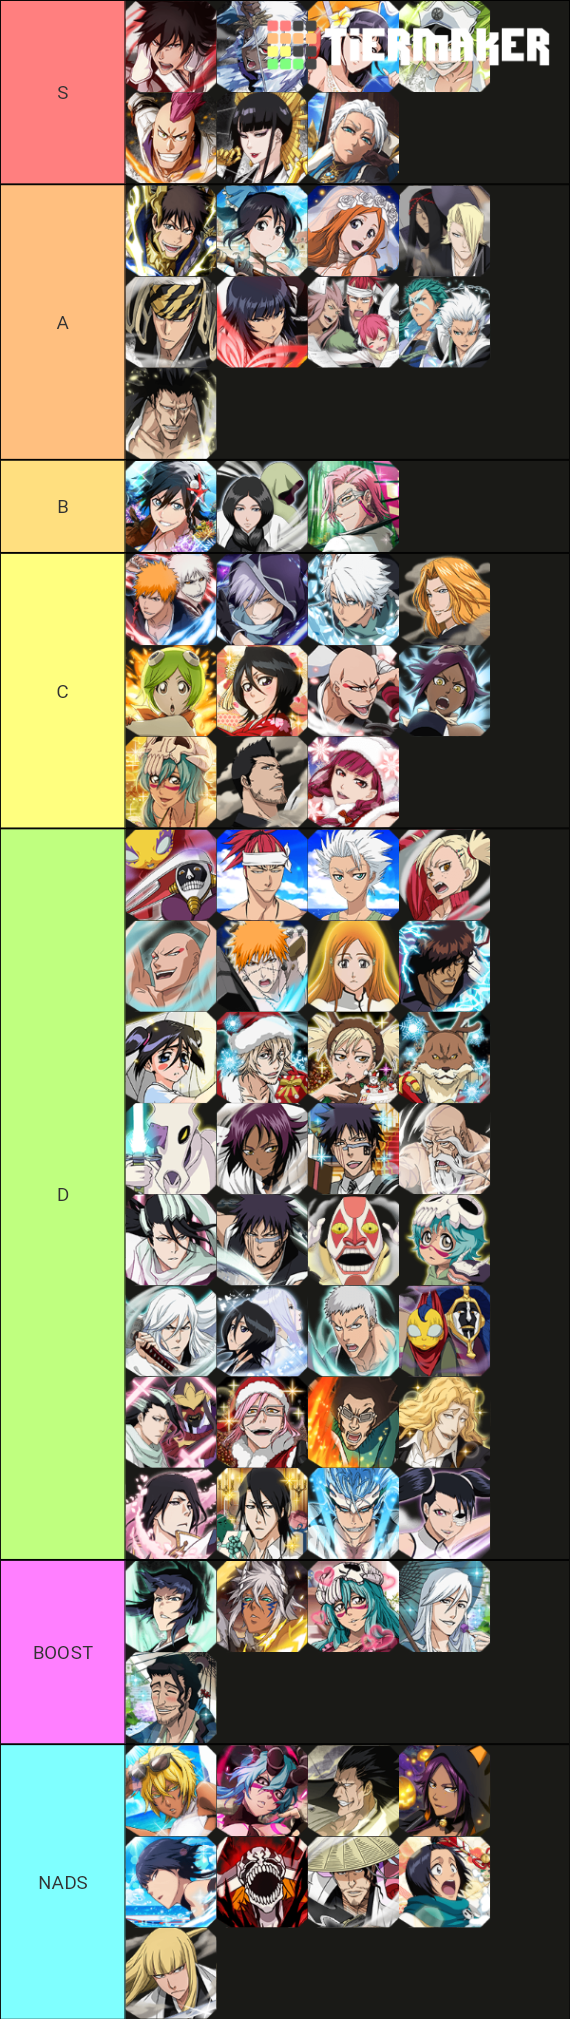 BBS All Character Tier List Rankings) TierMaker